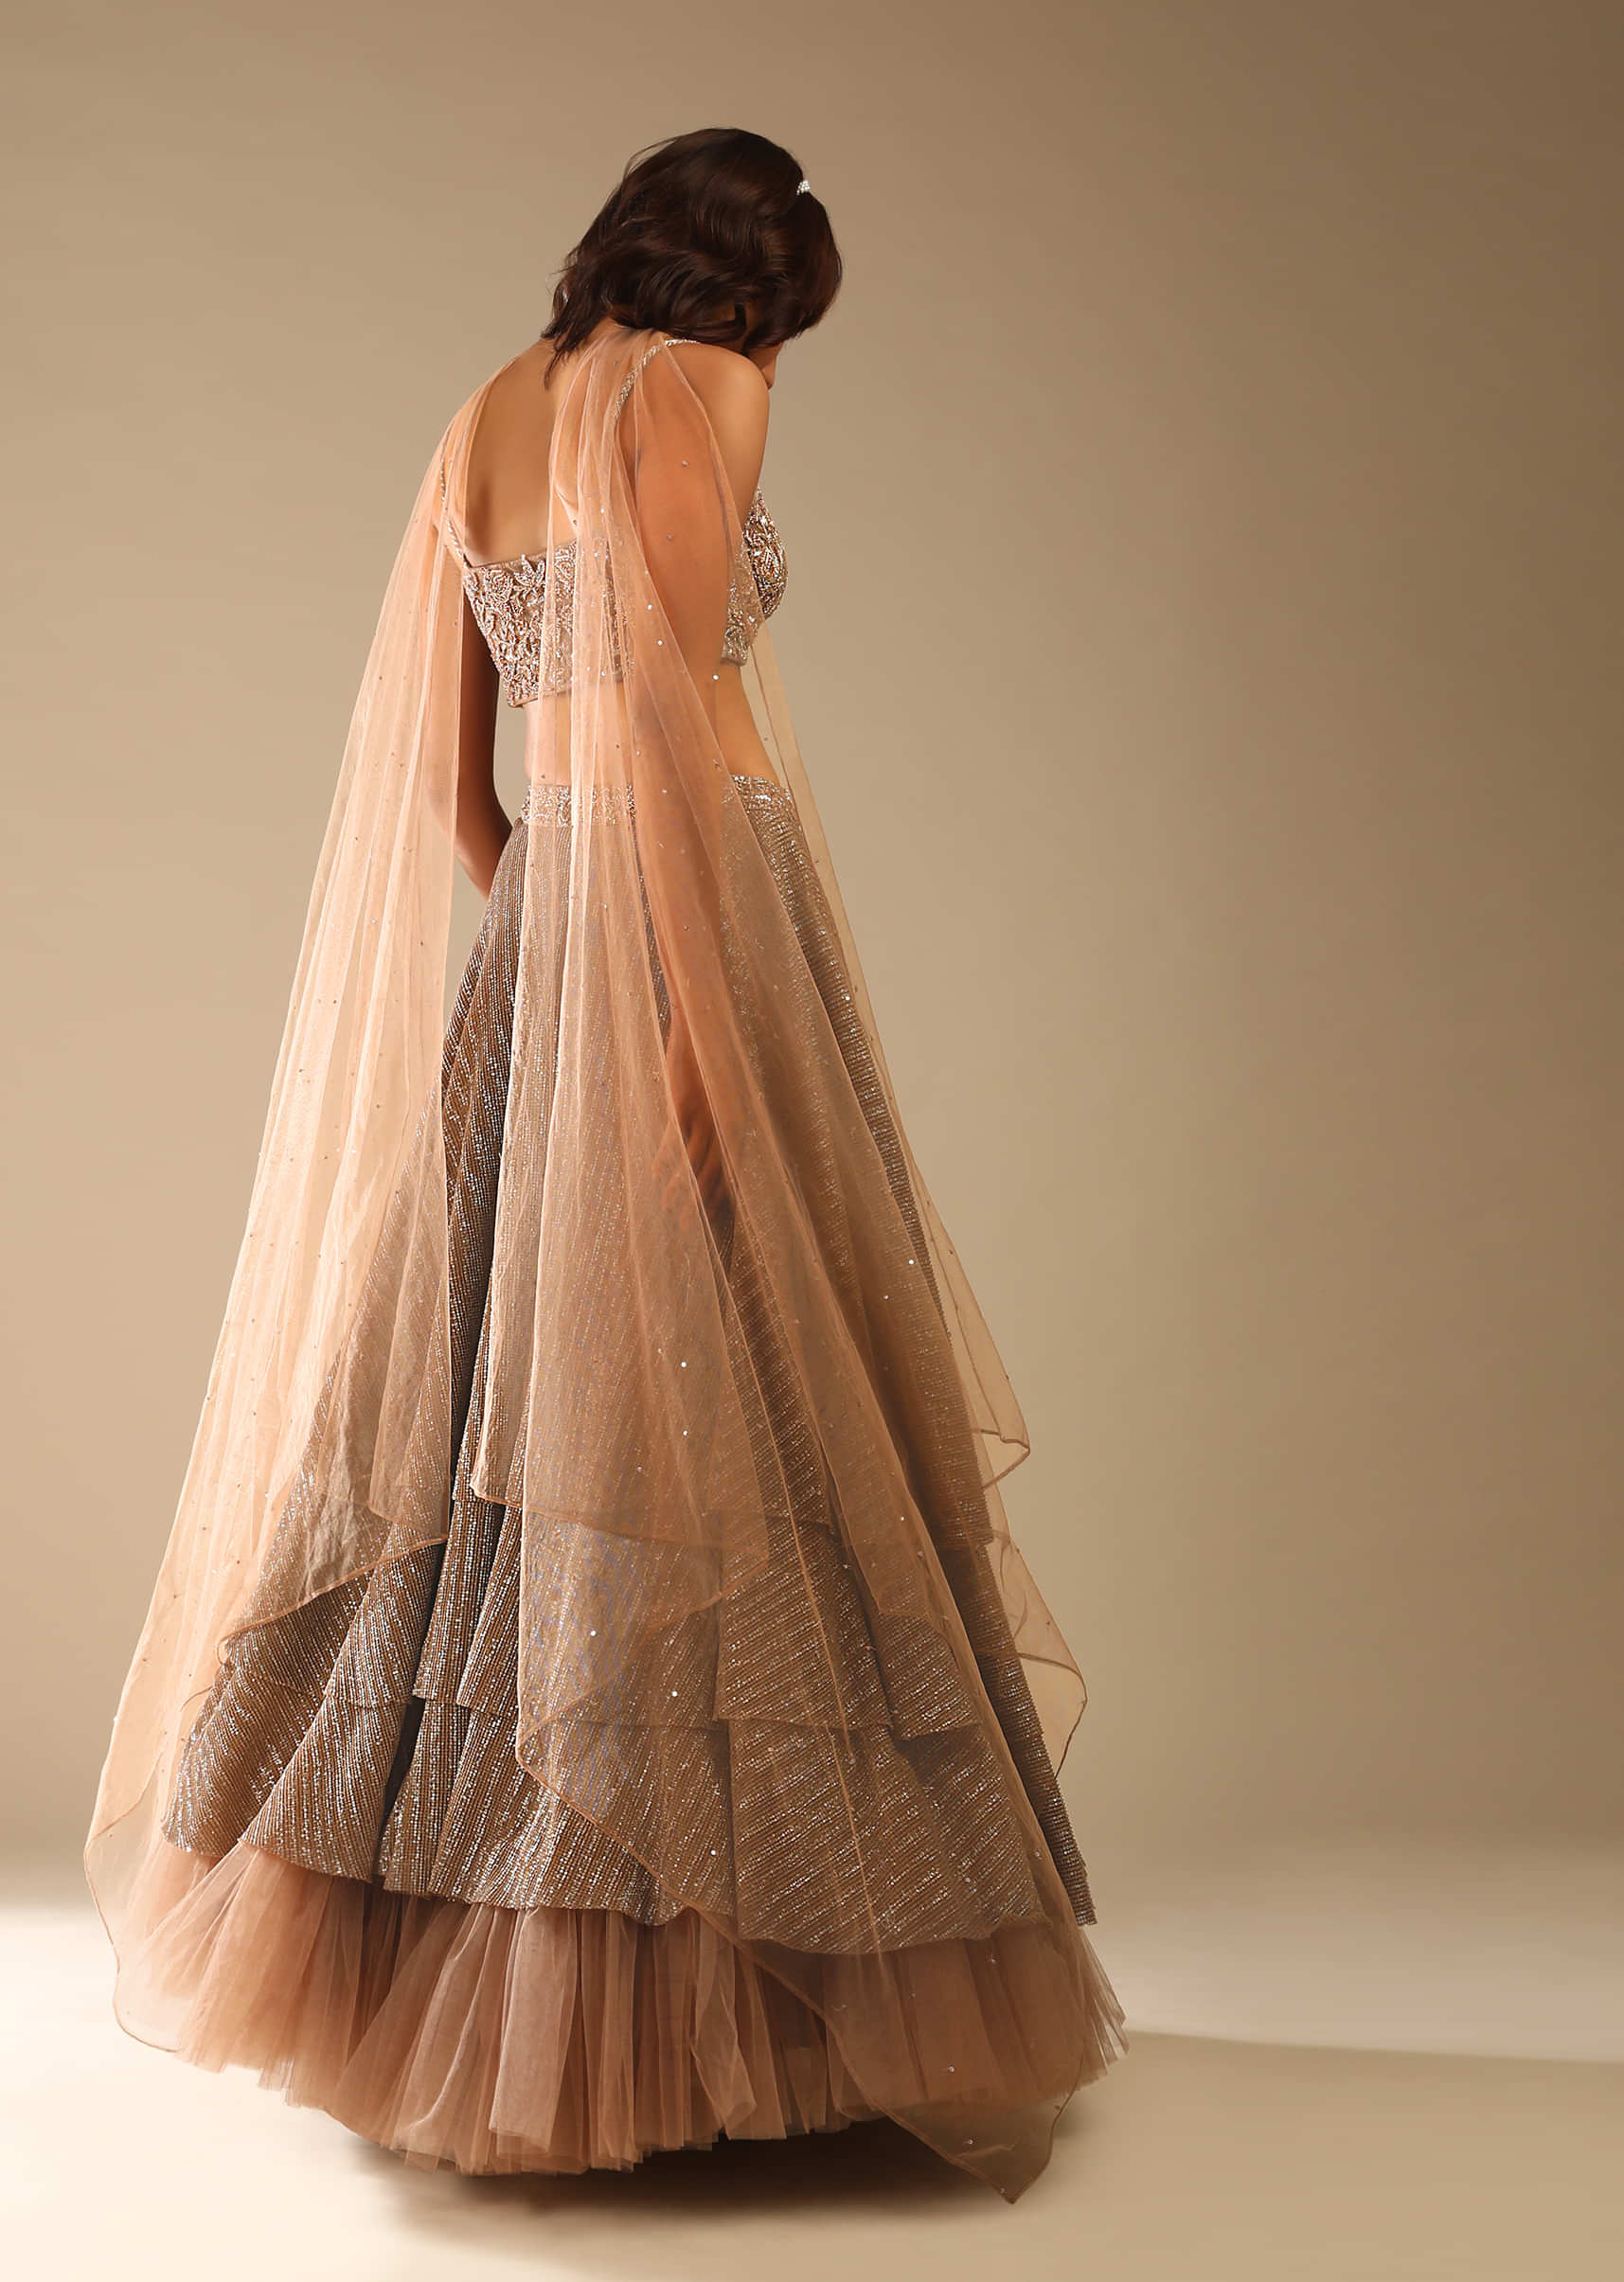 Taupe Layered Sequins Lehenga With Net Frill On The Hem And Cut Dana Embroidered Choli And Choker Dupatta 